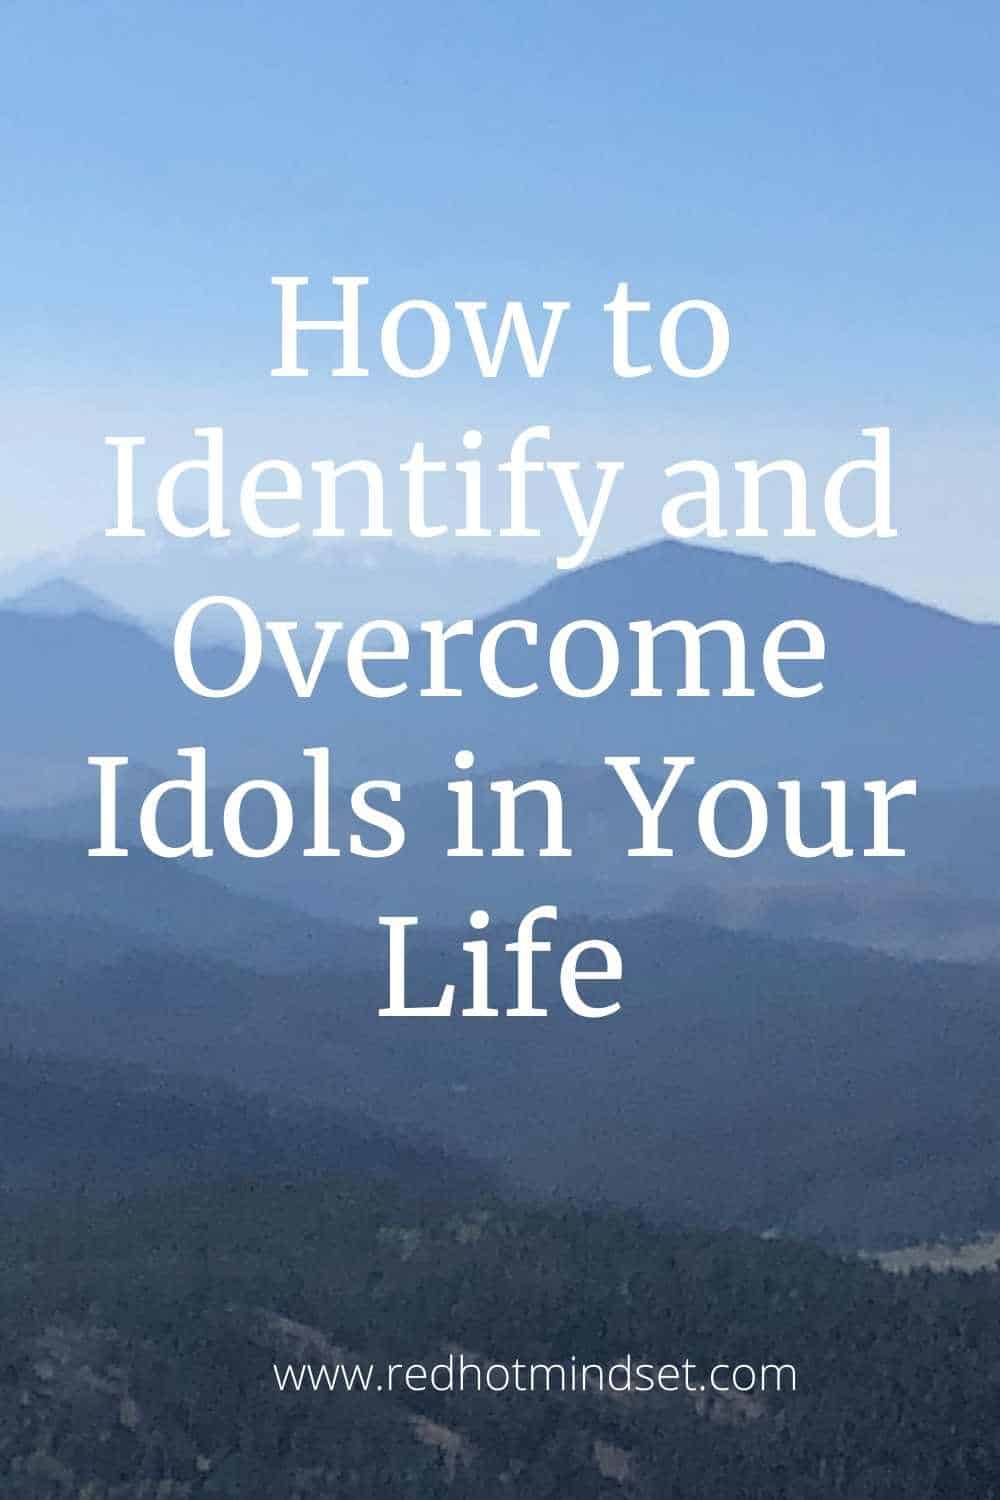 A Personal Journey of Identifying and Breaking Idols in My Life